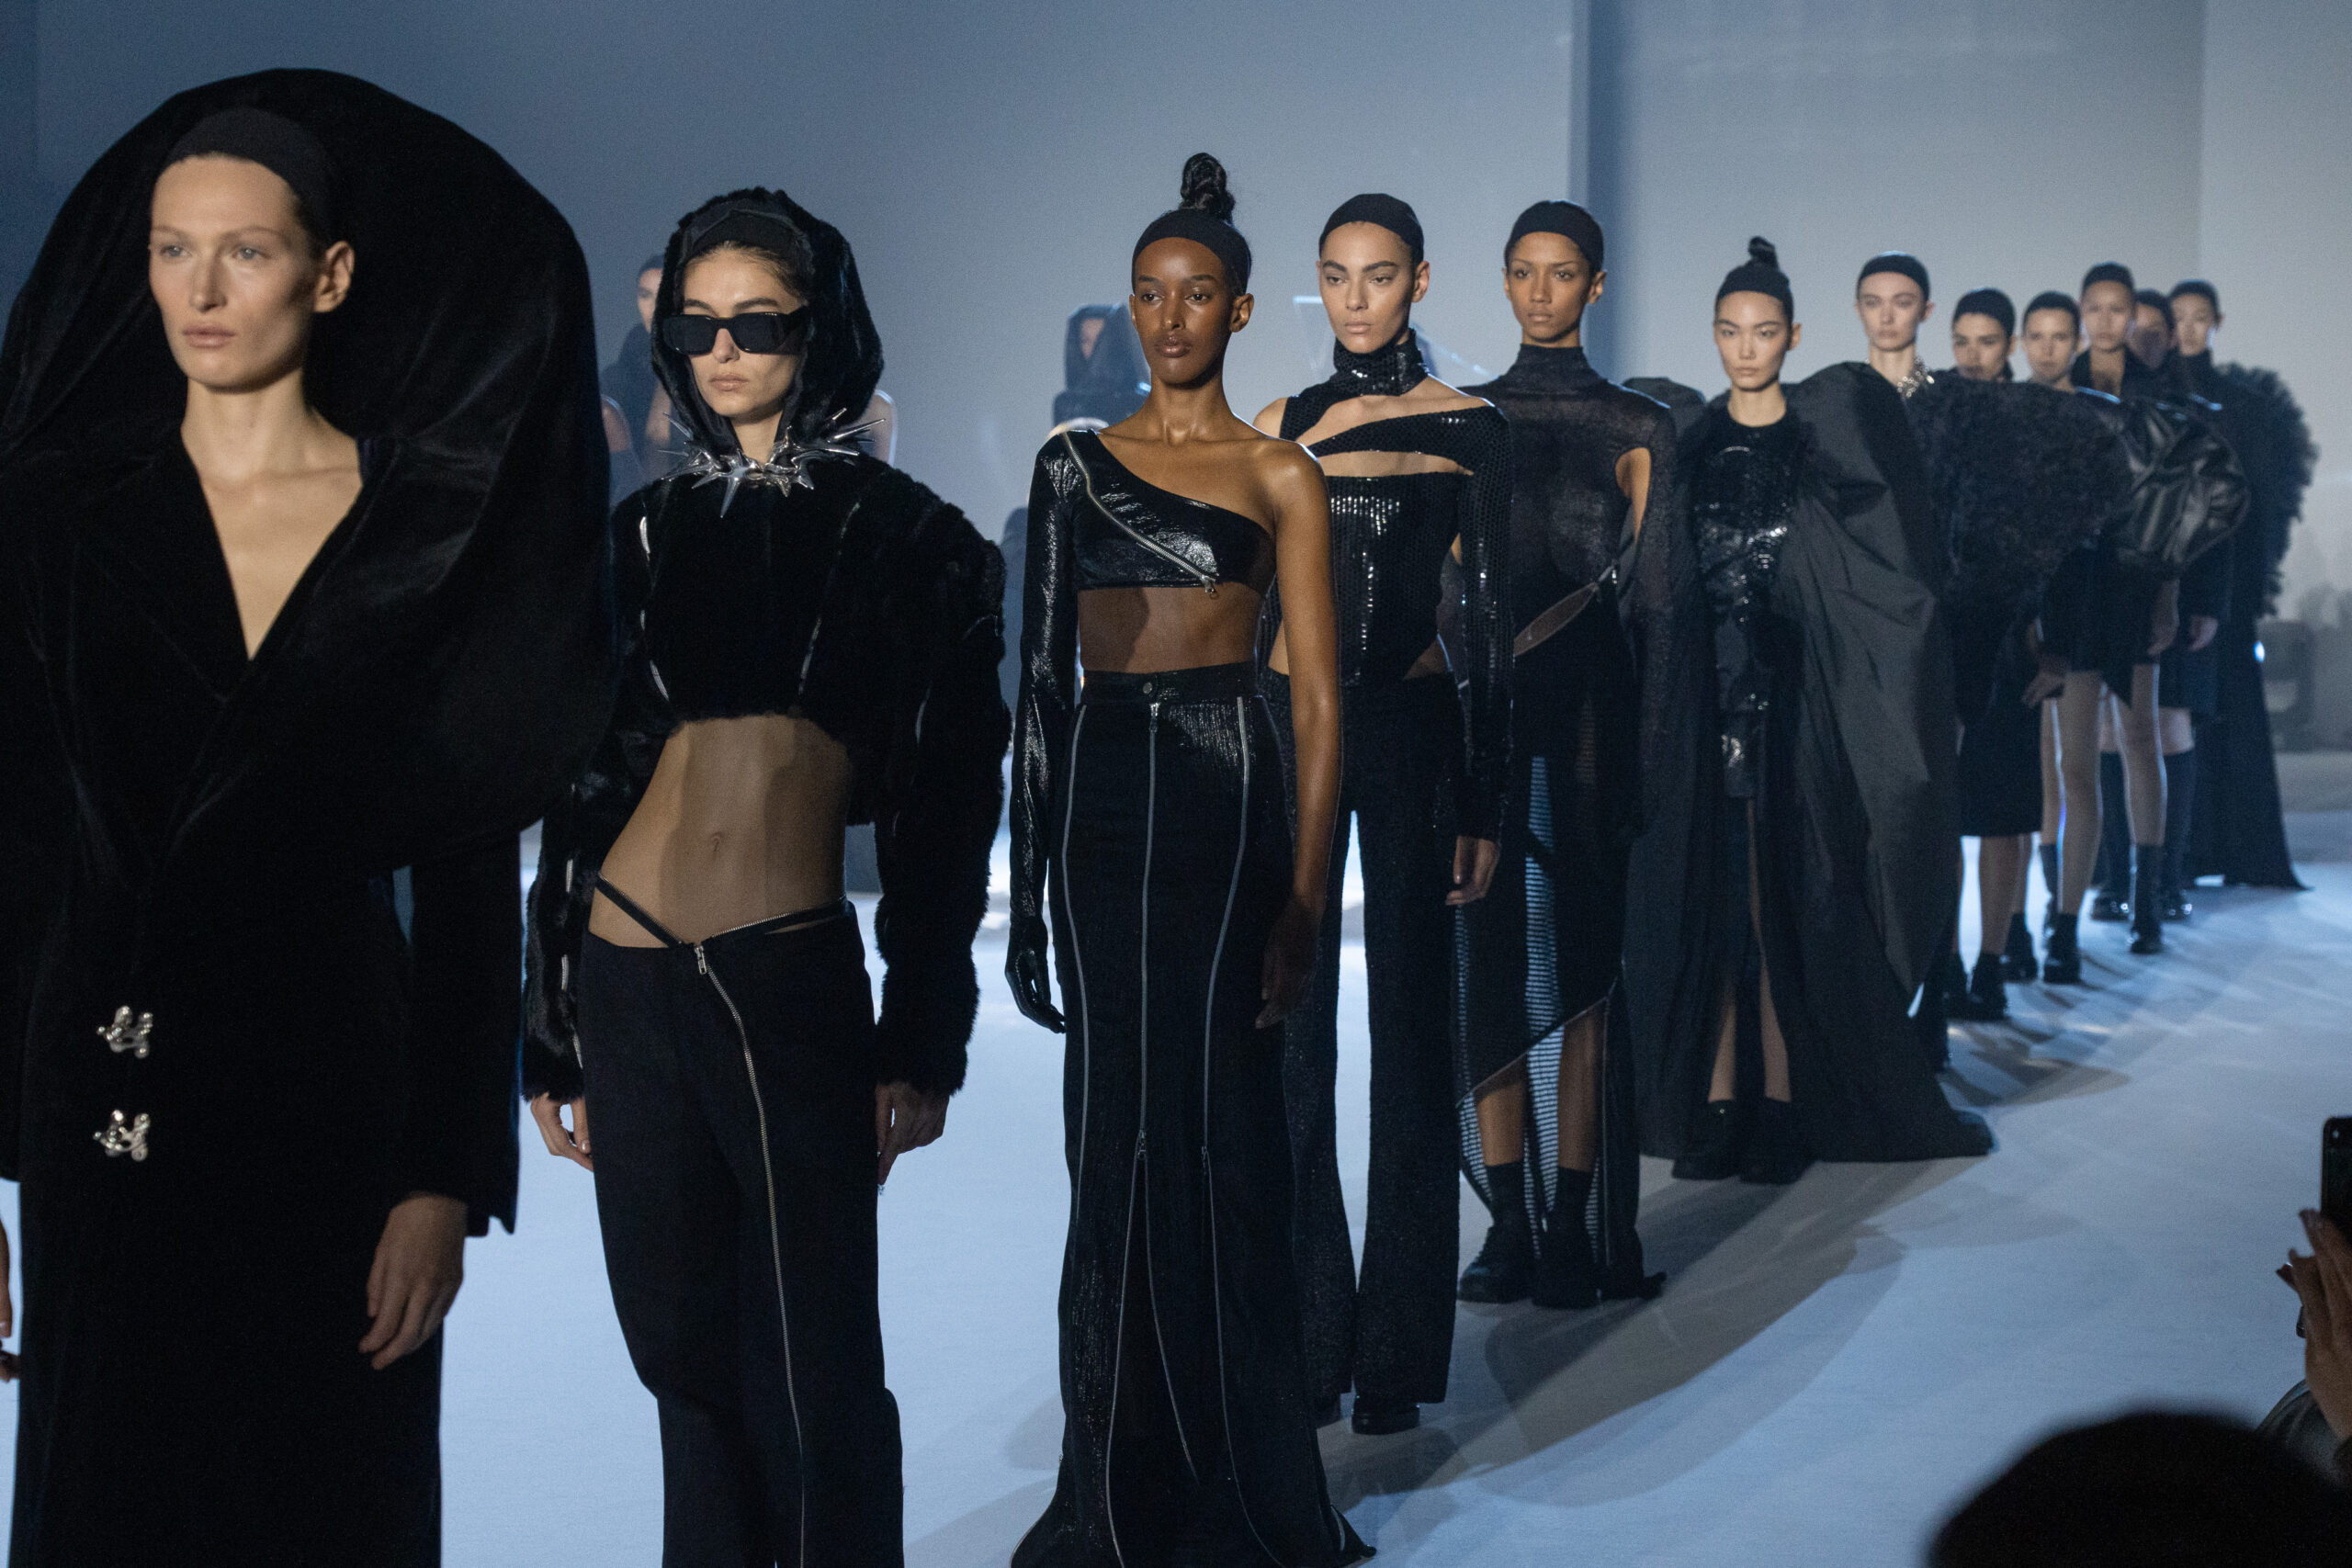 A line of models wearing MAISON YOSHIKI PARIS designs strides down the runway at Milan Fashion Week Fall/Winter 2024/2025. The collection showcases black, tailored pieces with elements of glamor and androgyny. A standout garment includes a dramatic, oversized hooded piece at the forefront.